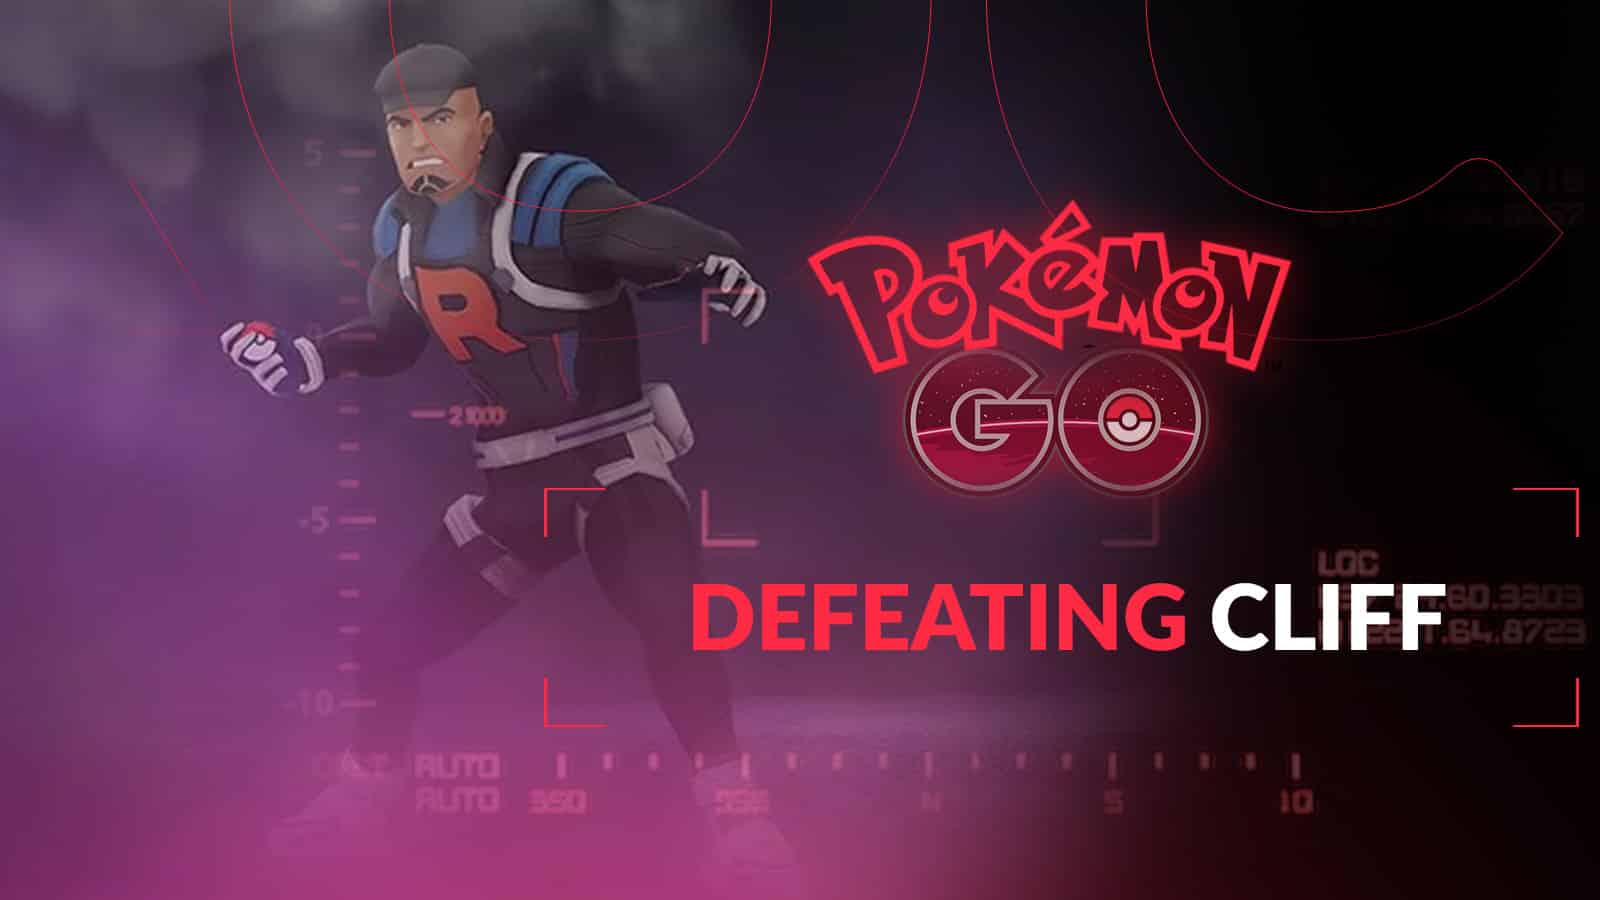 Artwork featuring the Pokemon Go logo, Cliff and 'Defeating Cliff'